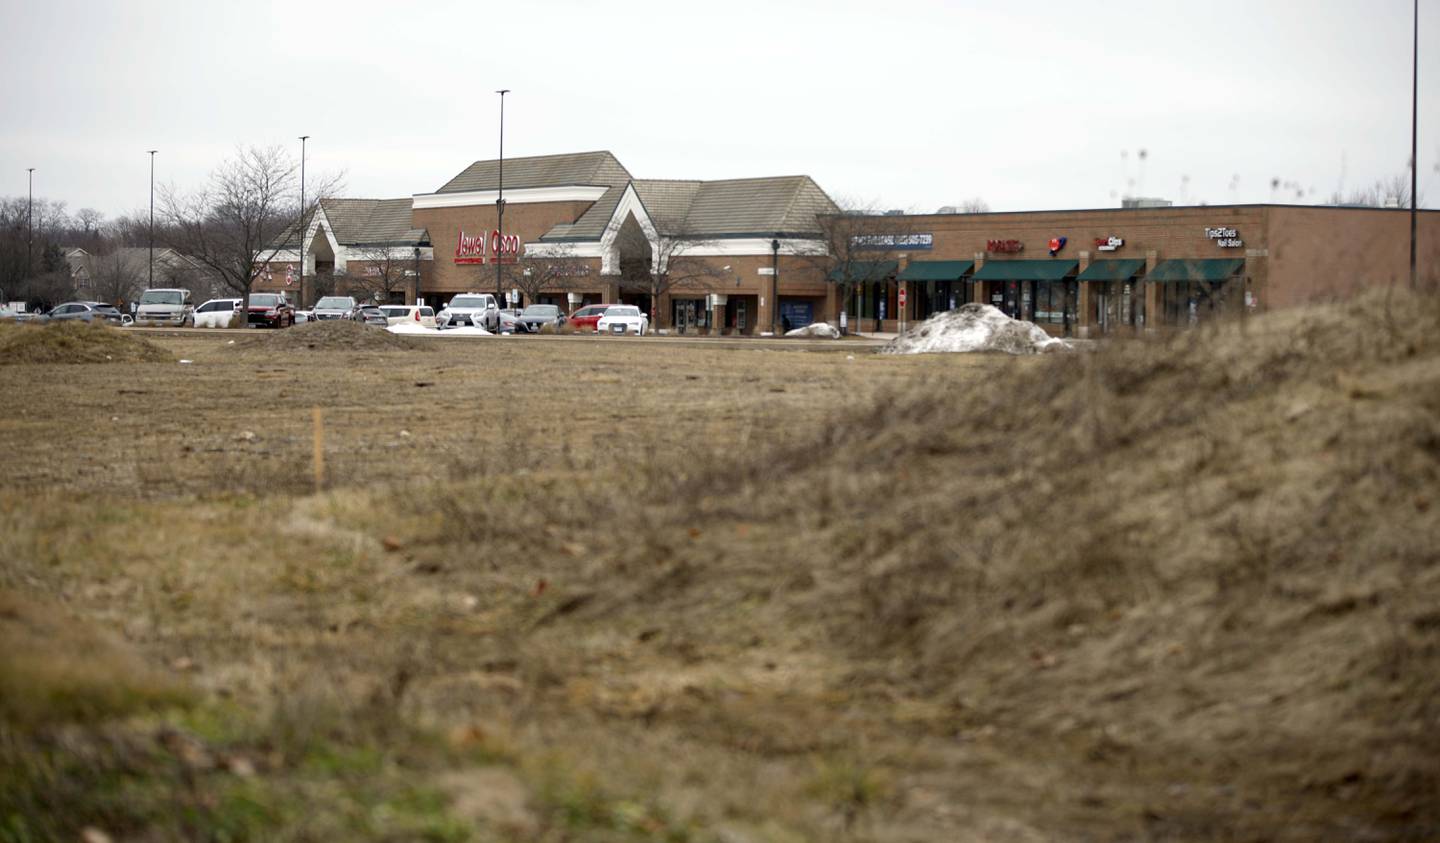 St. Charles officials are expected to review plans this spring for a four-building development at the northeast intersection of Kirk Road and Main Street/Route 64. The developer hopes to bring a mix of restaurant and entertainment uses to about 8 acres of vacant land just south of the Jewel strip mall.